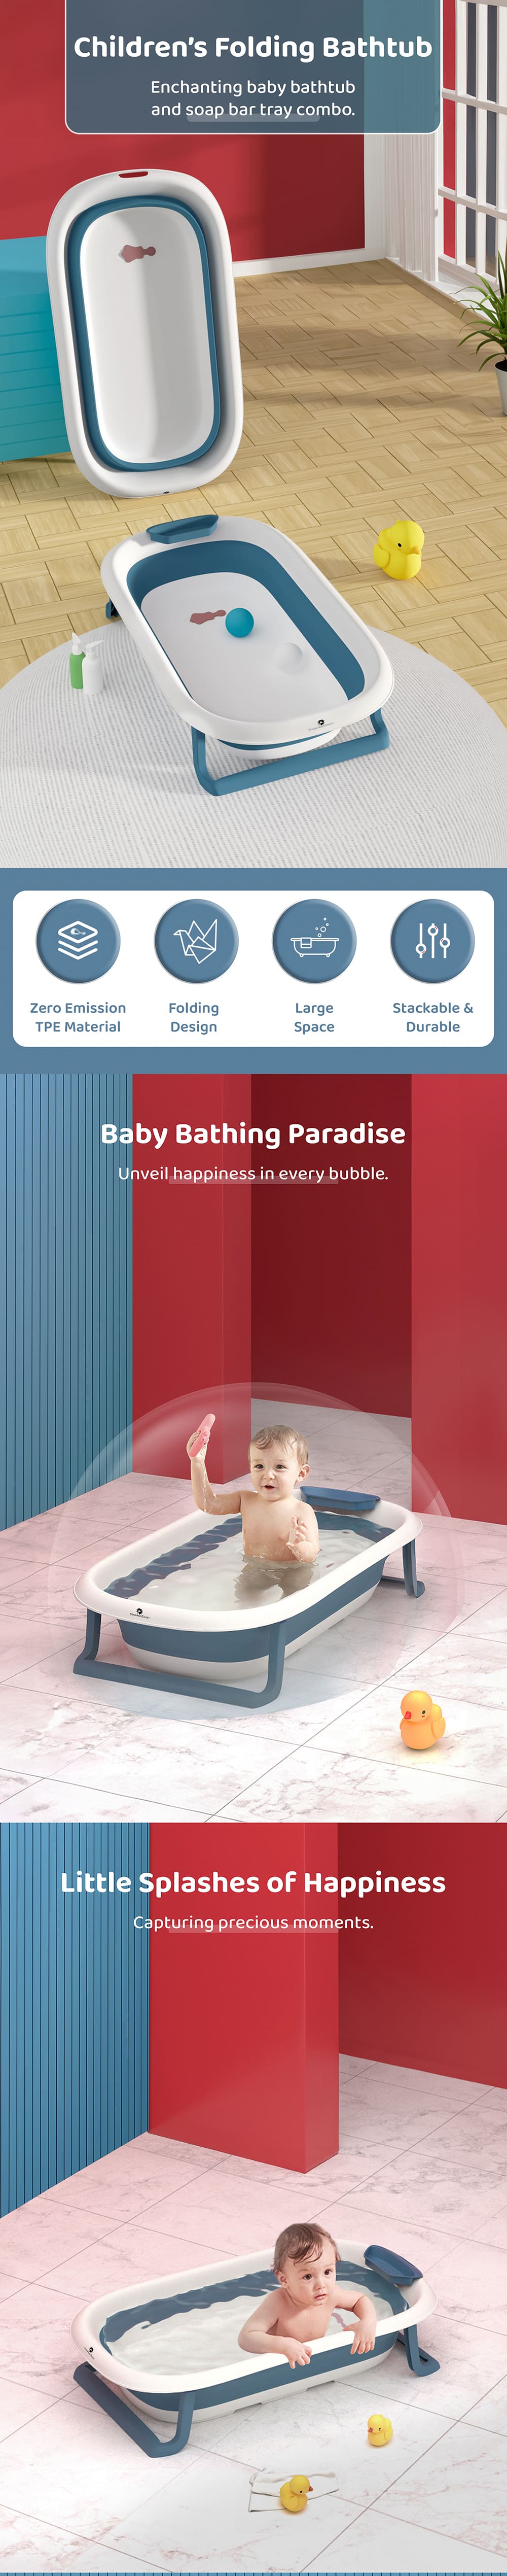 Foldable Bathtub for Baby with Soap Bar